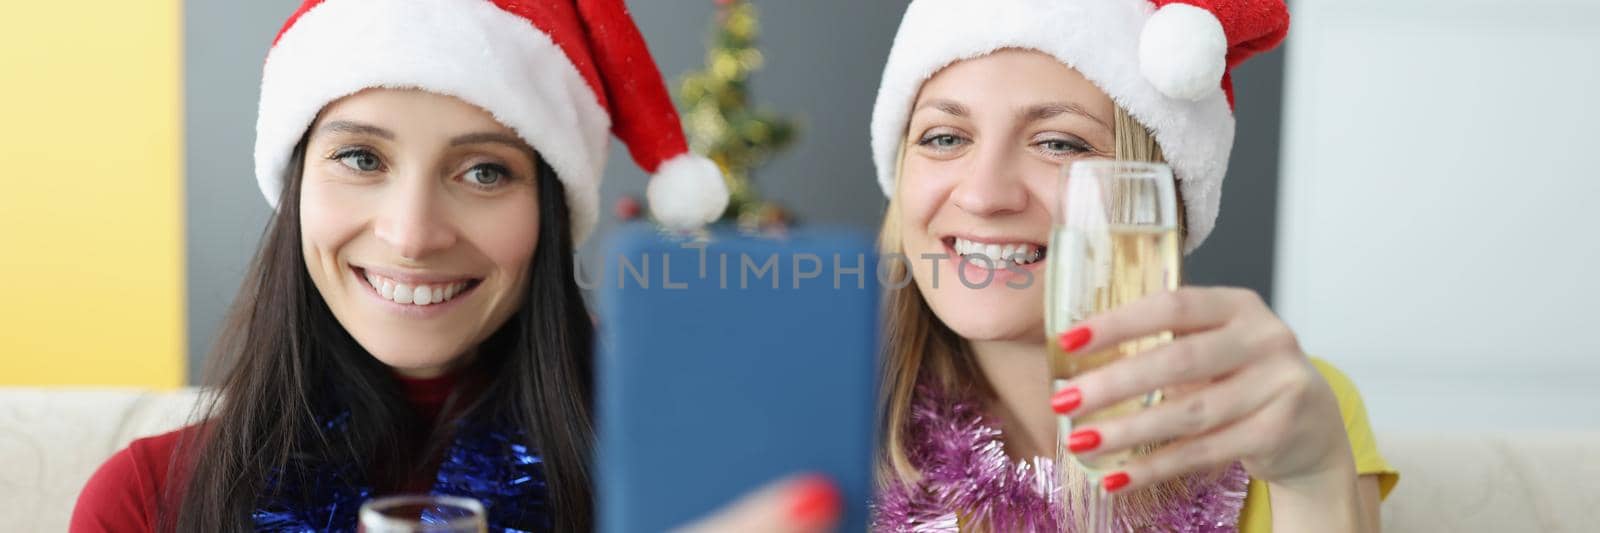 Cheerful sisters making selfie on smartphone holding champagne glasses by kuprevich